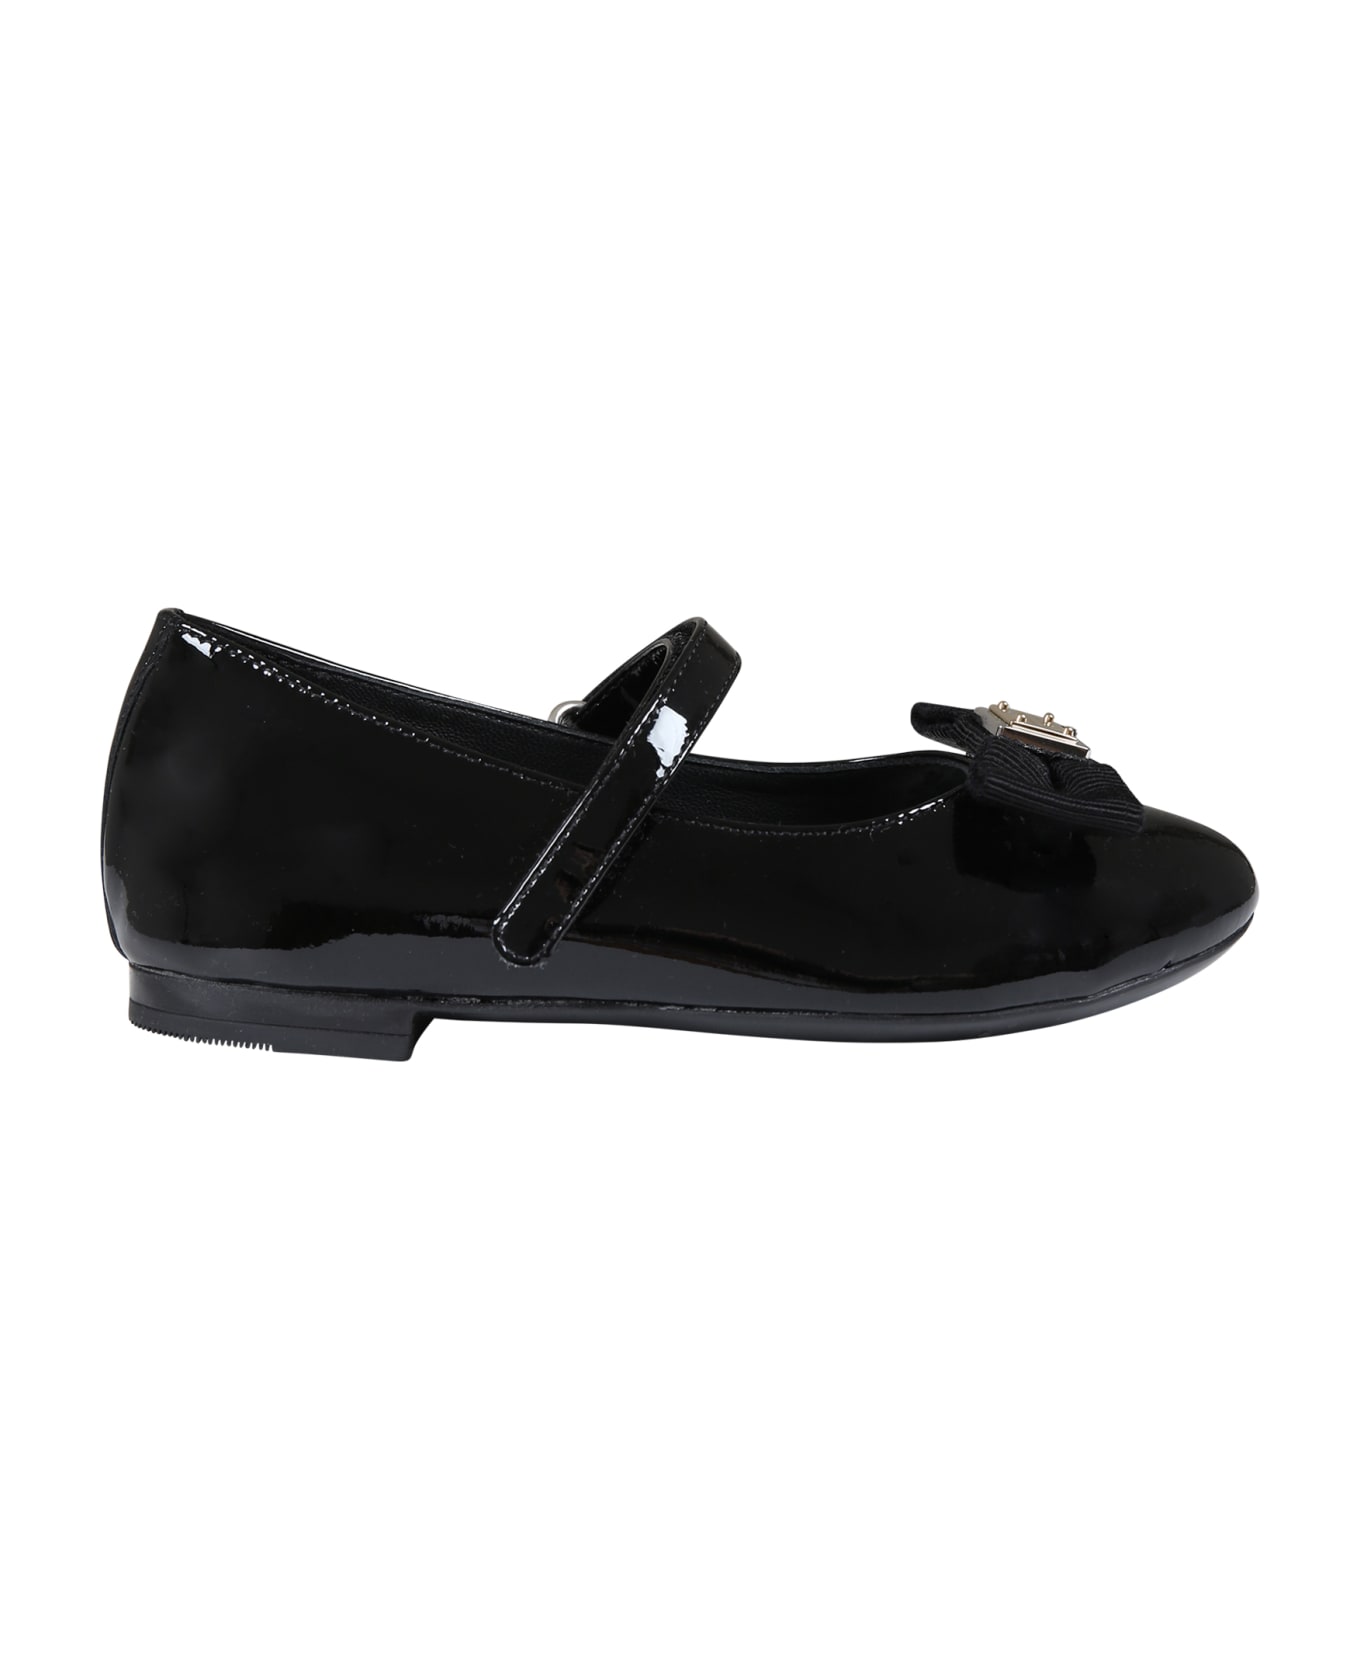 Dolce & Gabbana Black Ballet Flats For Girl With Logo And Bow - Black